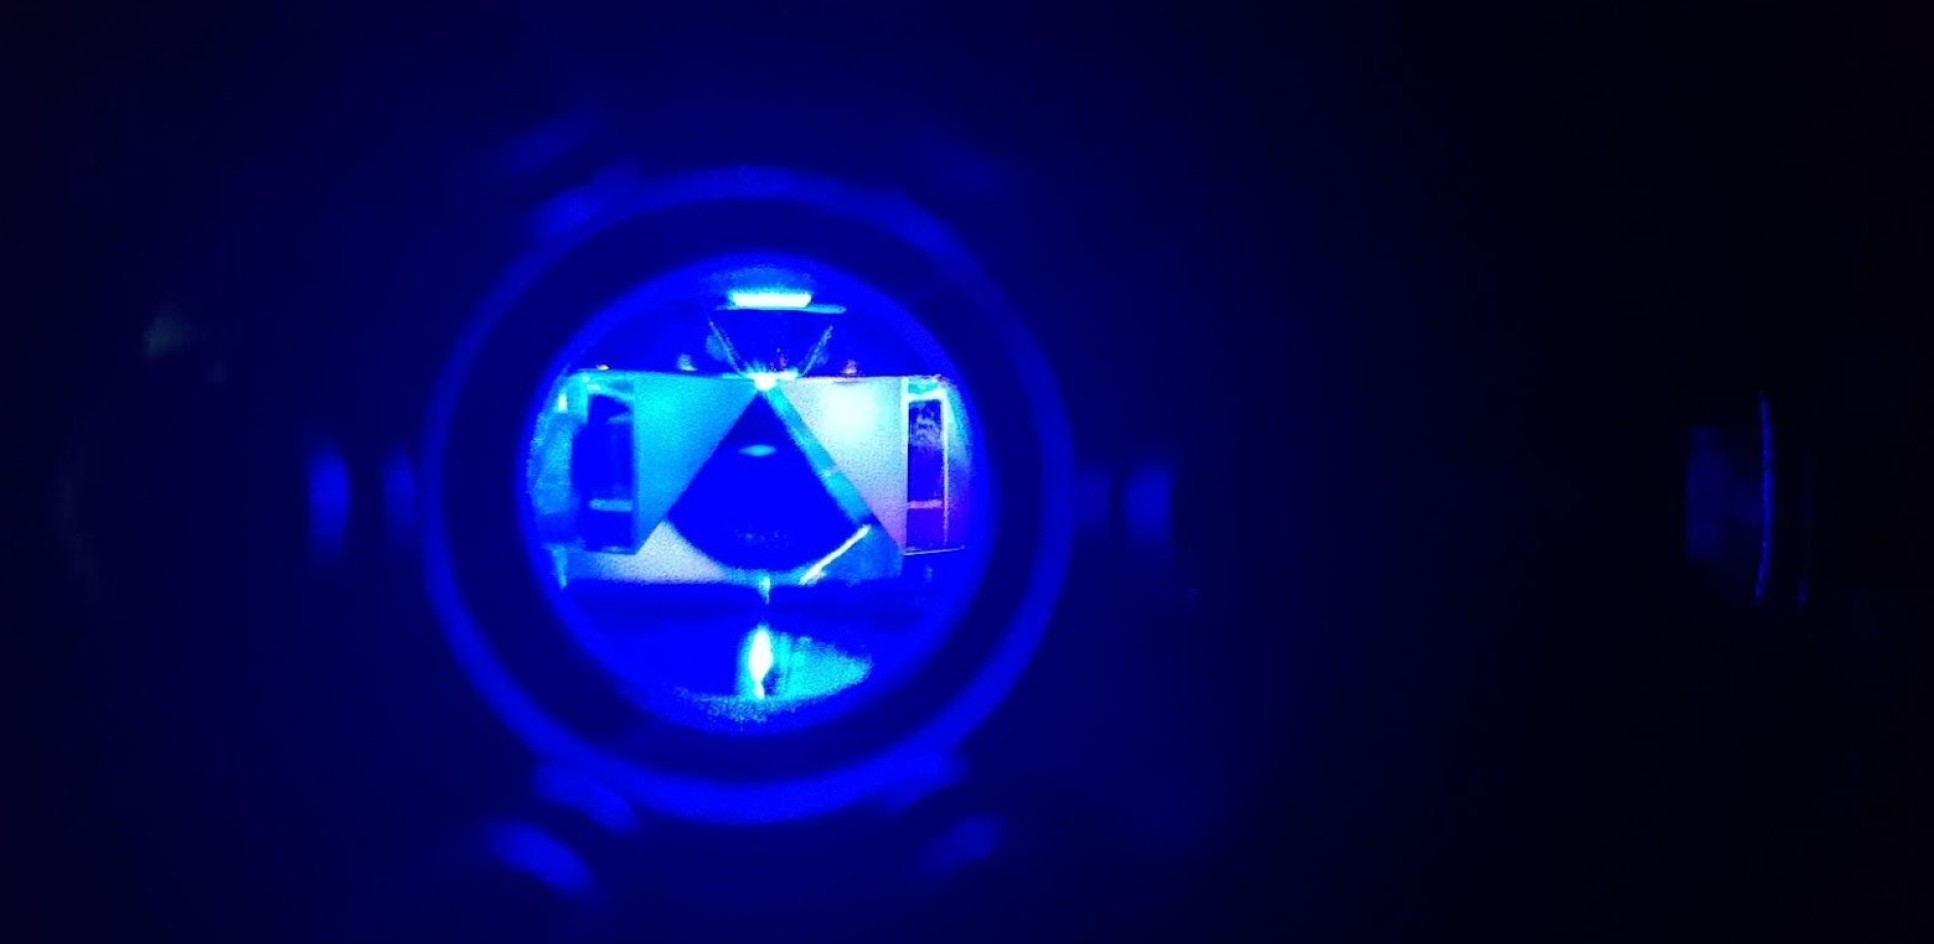 Small window into an apparatus showing a glowing blue point